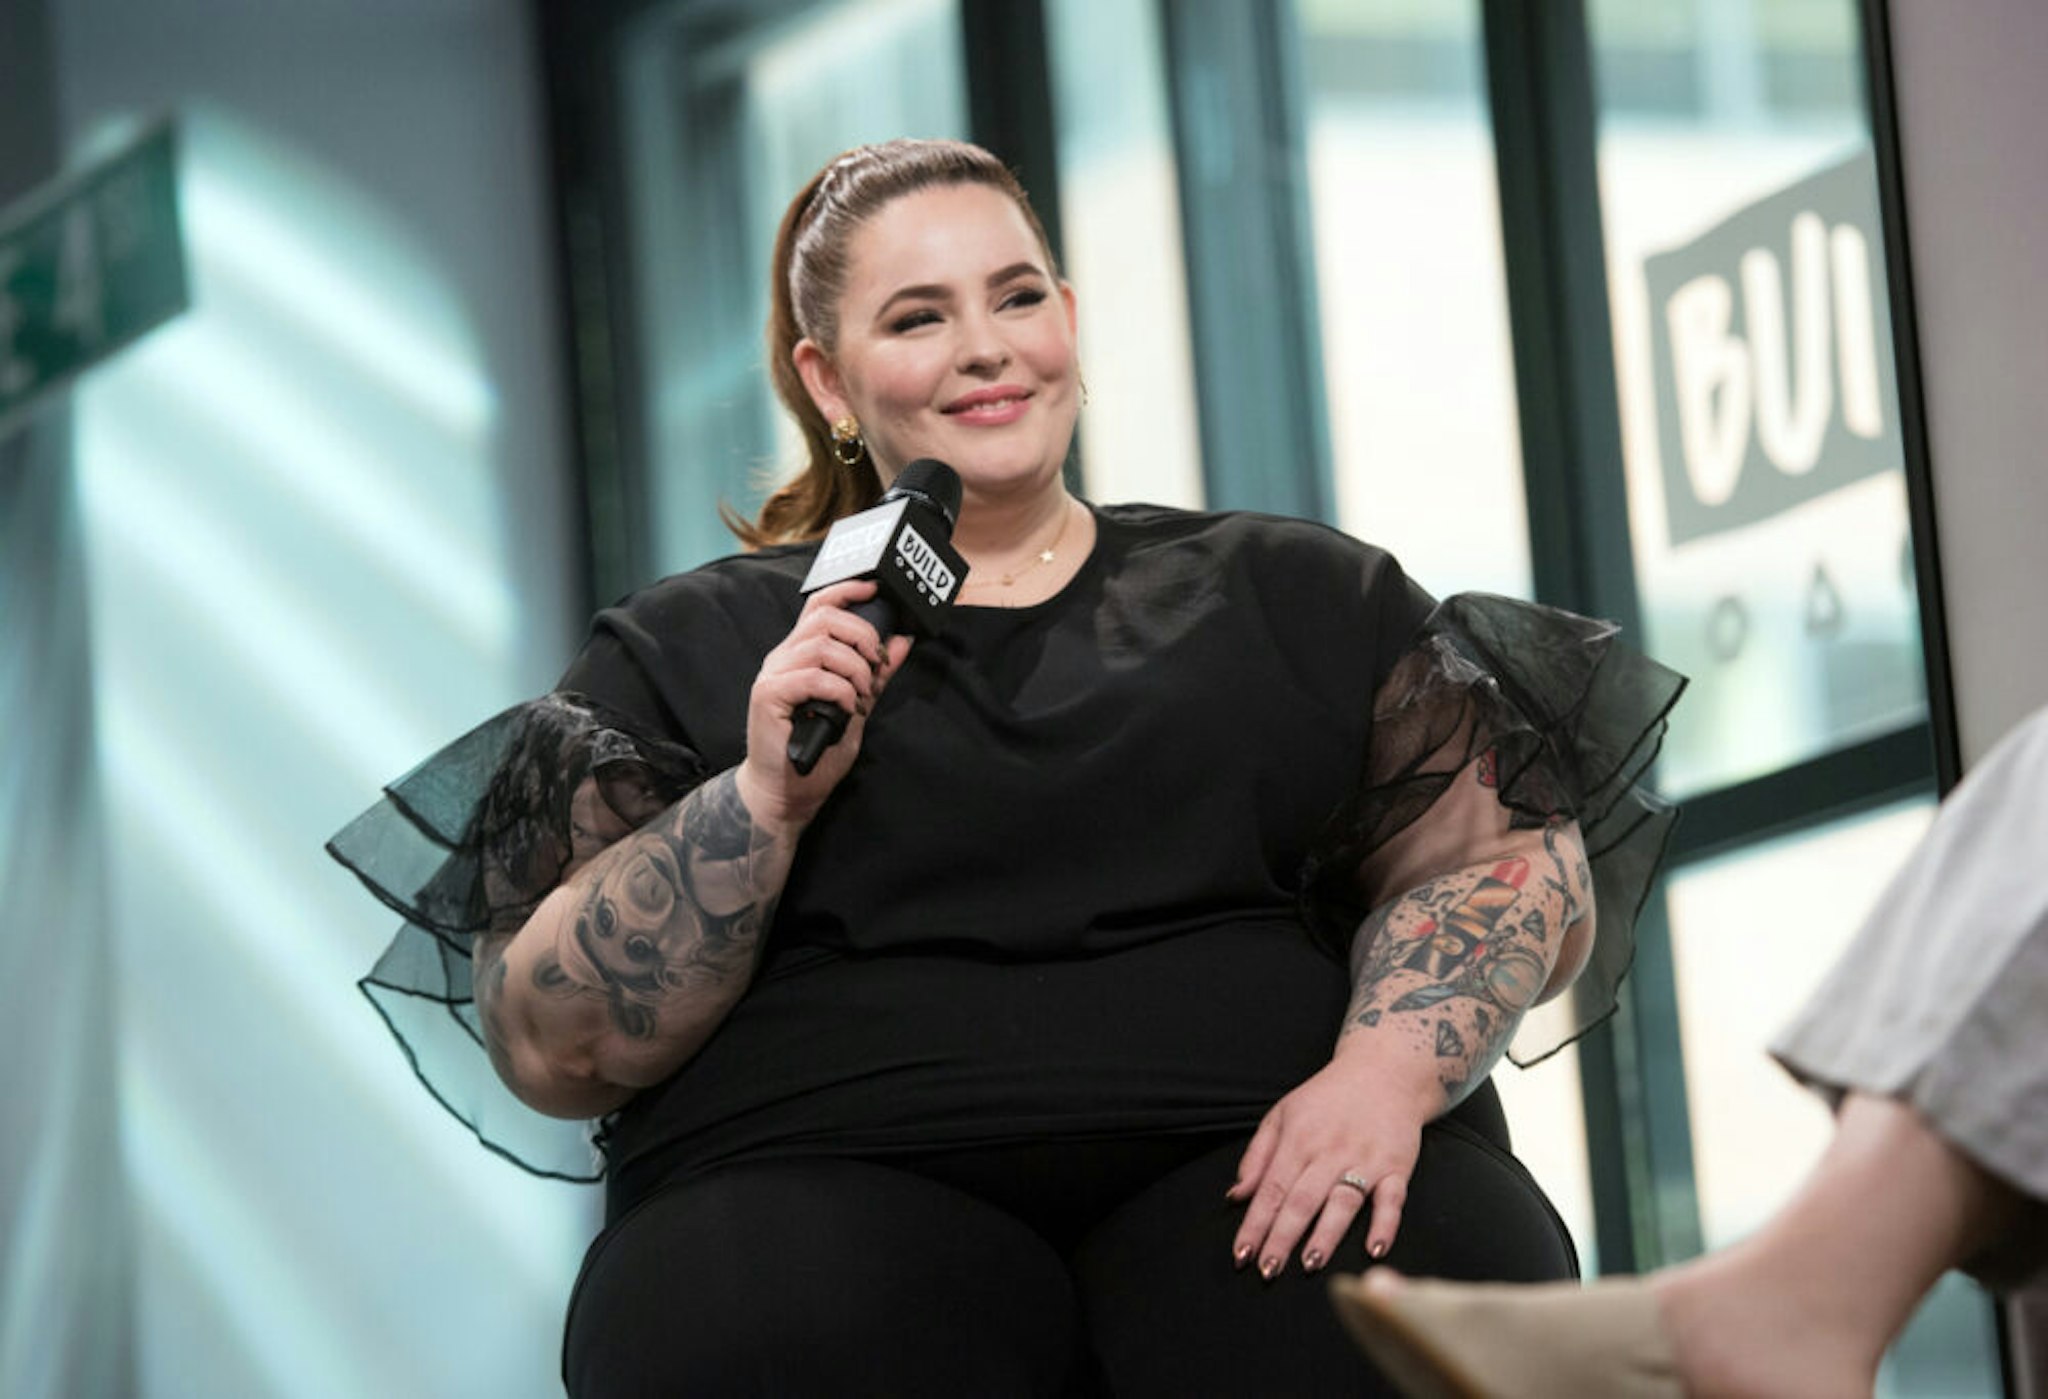 NEW YORK, NY - SEPTEMBER 20: Tess Holliday visits Build Series to discuss her new book "The Not So Subtle Art Of Being A Fat Girl: Loving The Skin You're In" at Build Studio on September 20, 2017 in New York City.